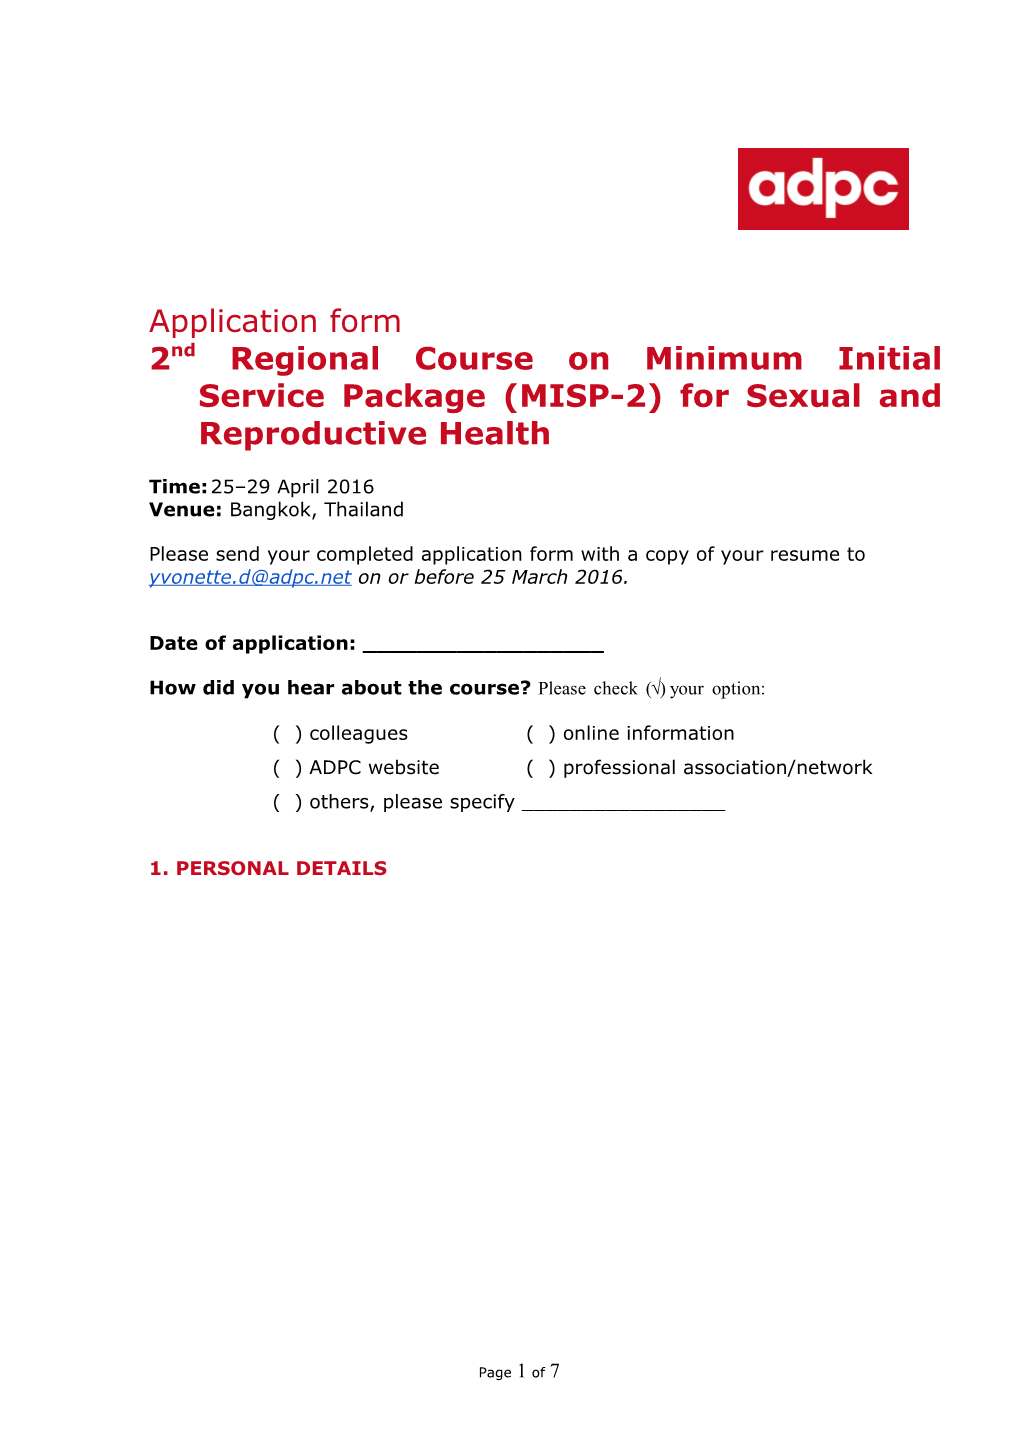 2Nd Regional Course on Minimum Initial Service Package (MISP-2) for Sexual and Reproductive